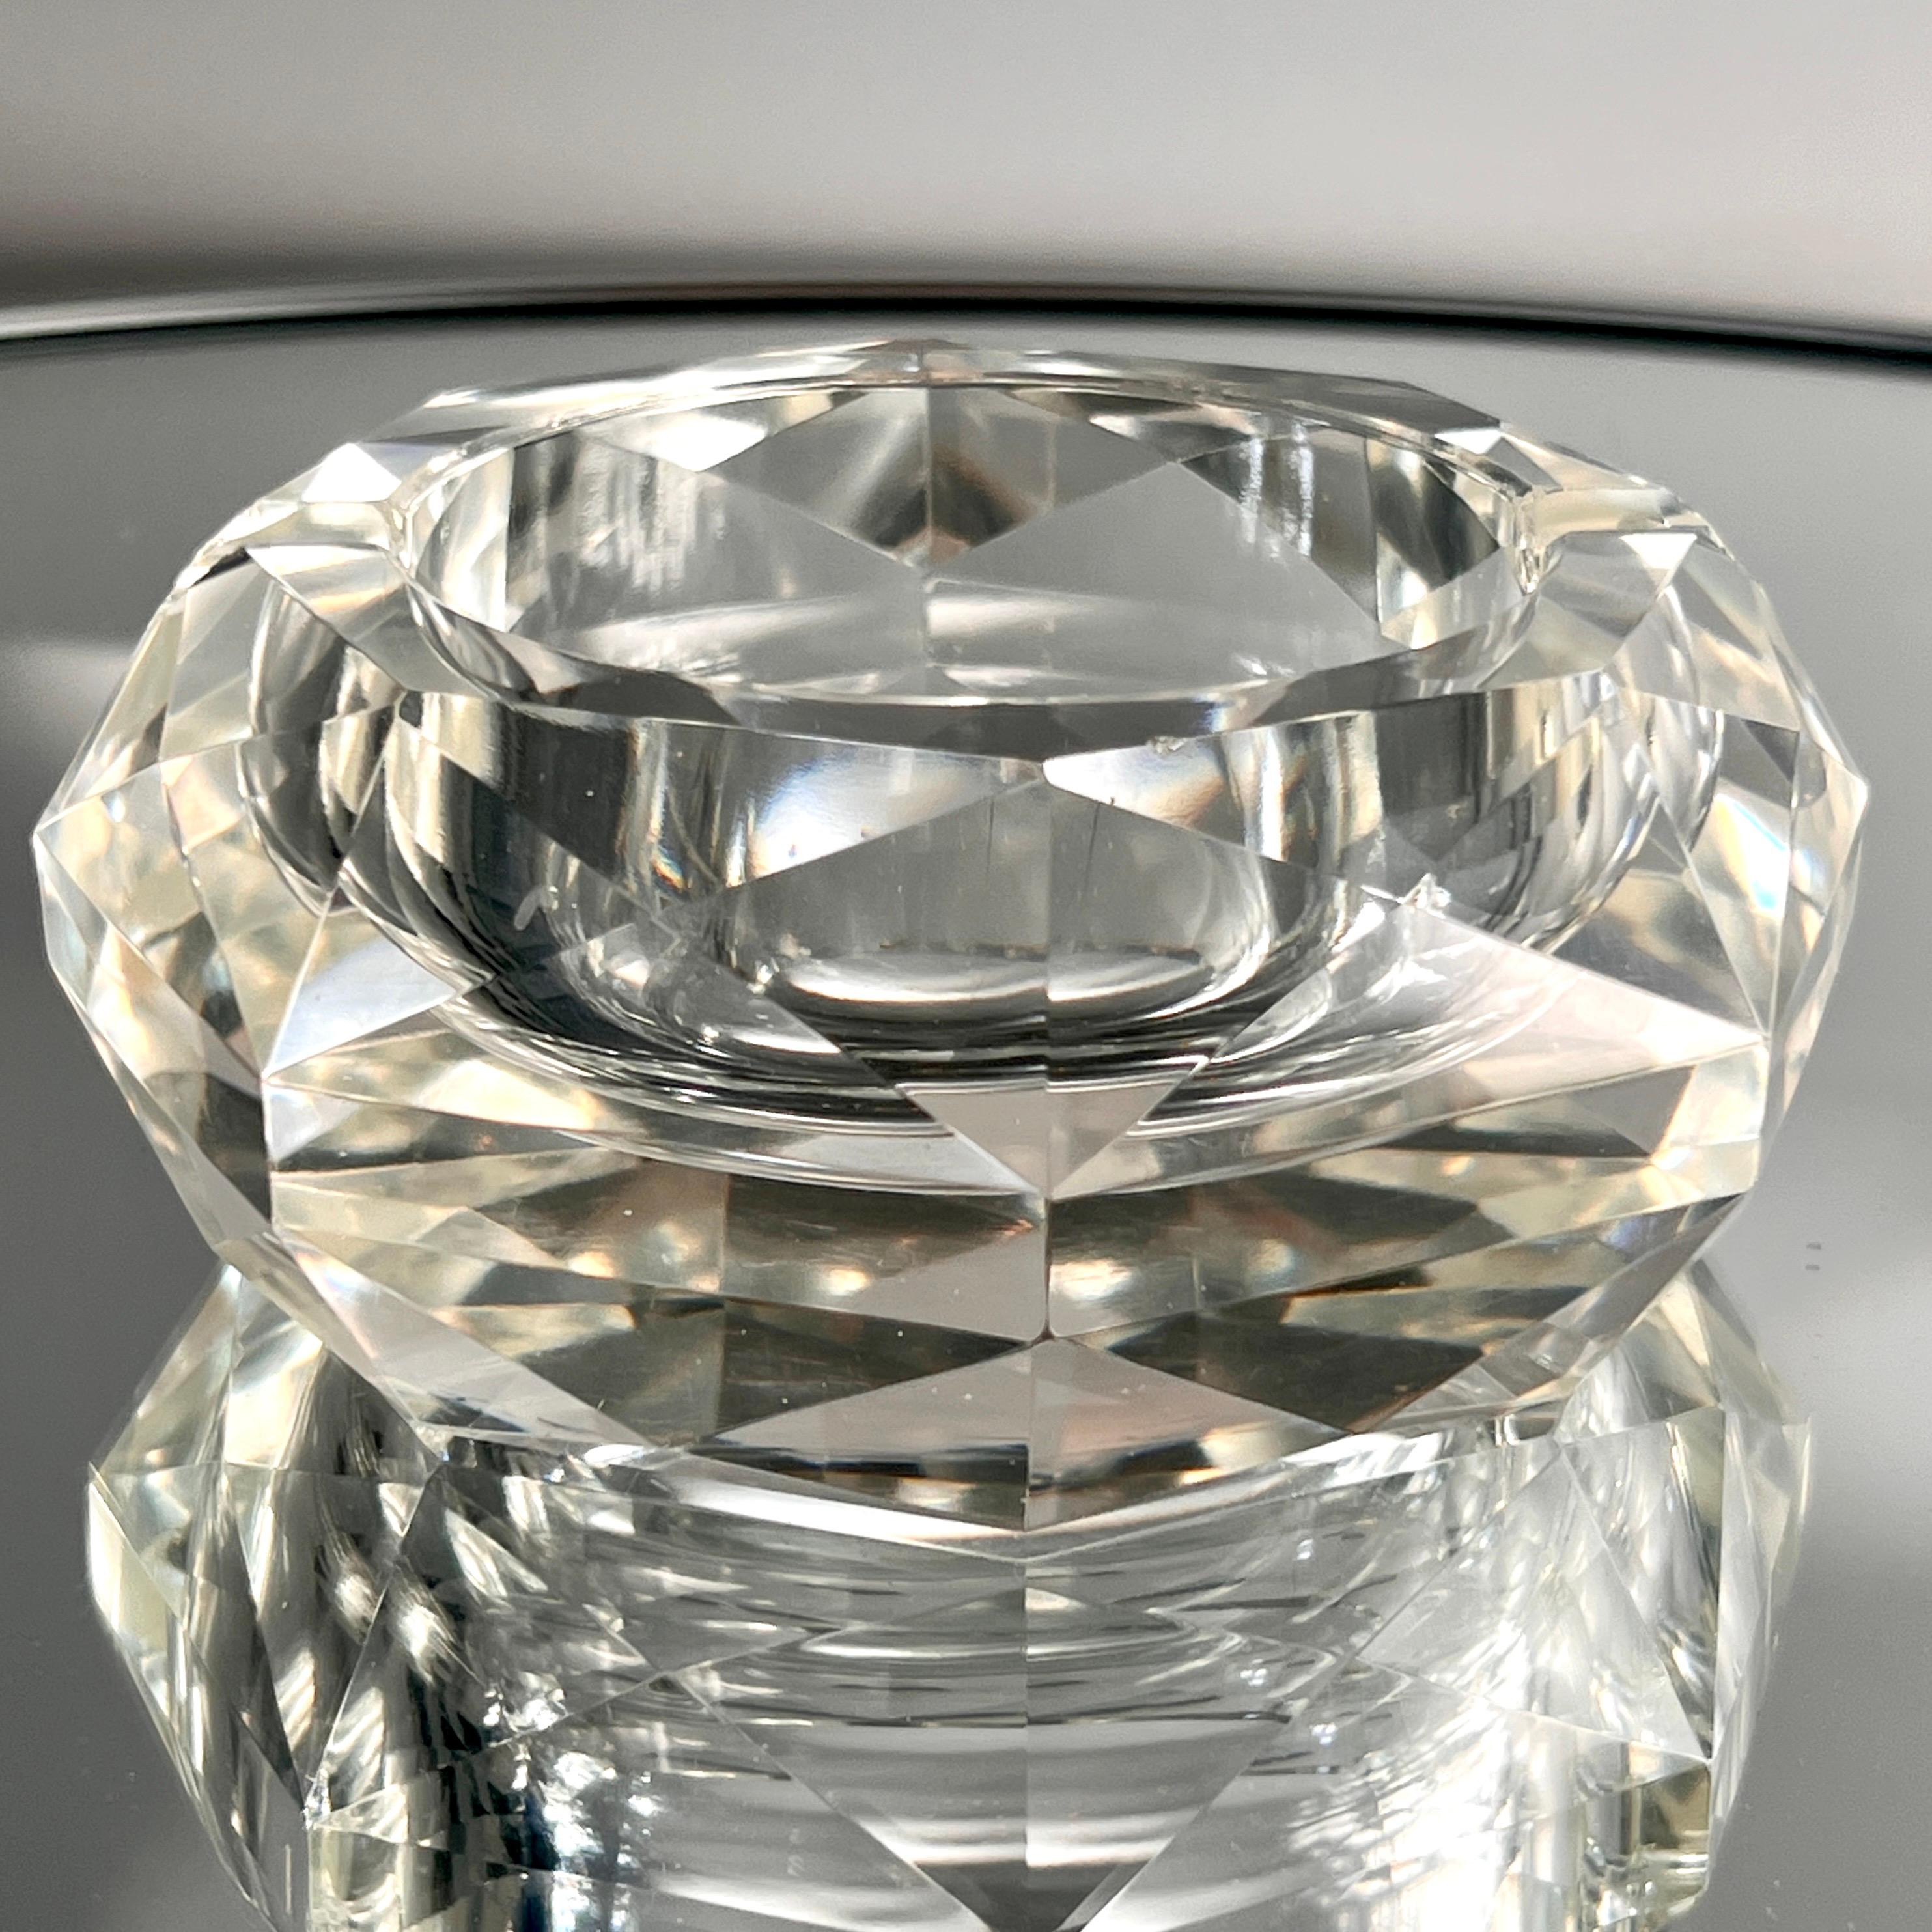 French Faceted Crystal Ashtray with Diamond Prism Design, France, c. 1960s For Sale